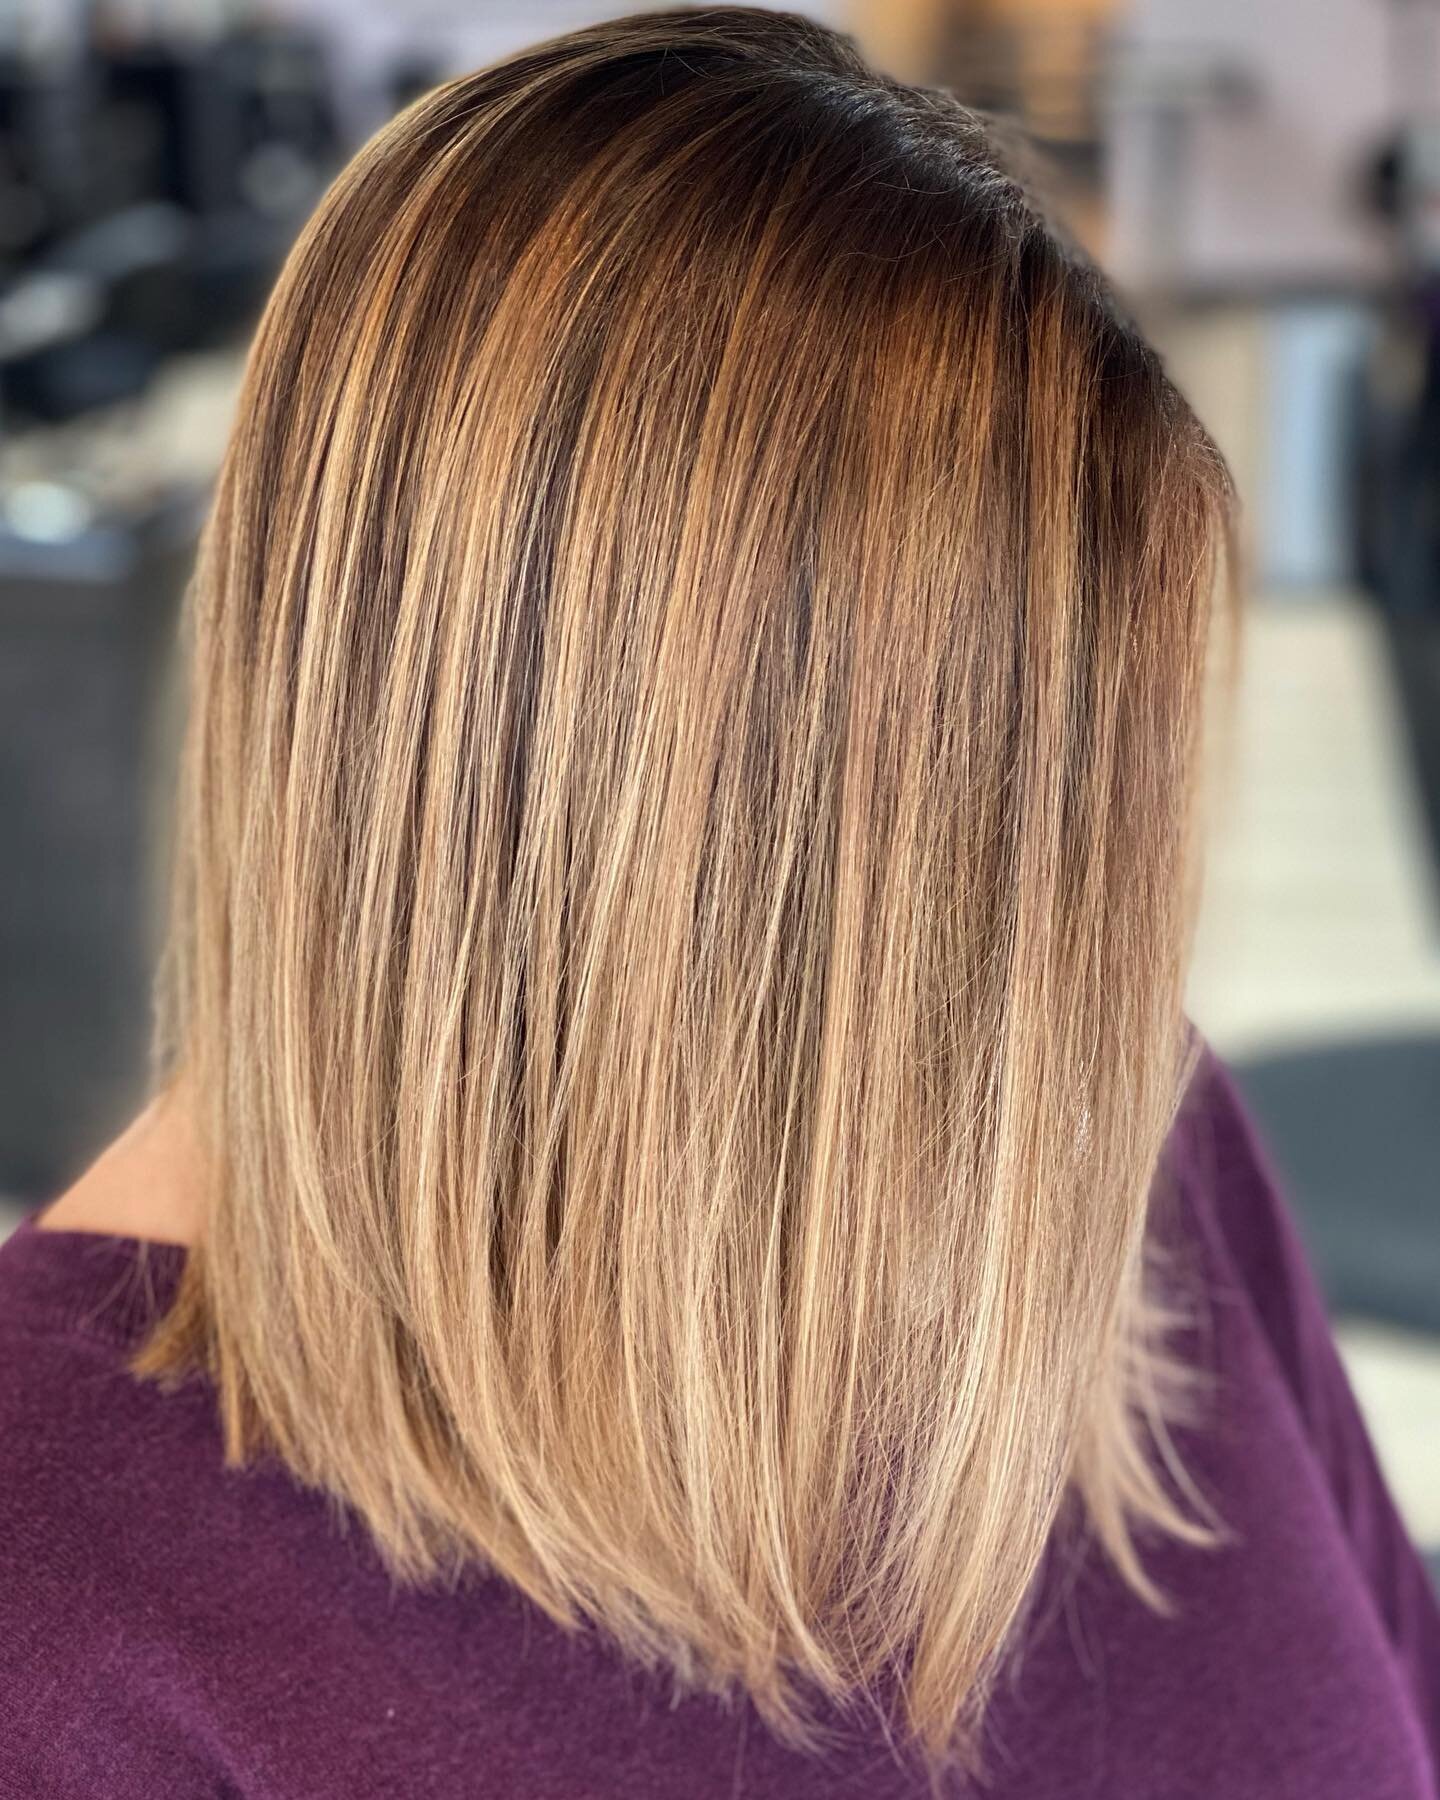 One of my favorite highlight concepts on fine hair is &ldquo;less is more.&rdquo; Fine hair can get solid-blond so easily and it&rsquo;s hard to maintain visible dimension. I popped six balayaged highlights around the top of Becca&rsquo;s head to bri